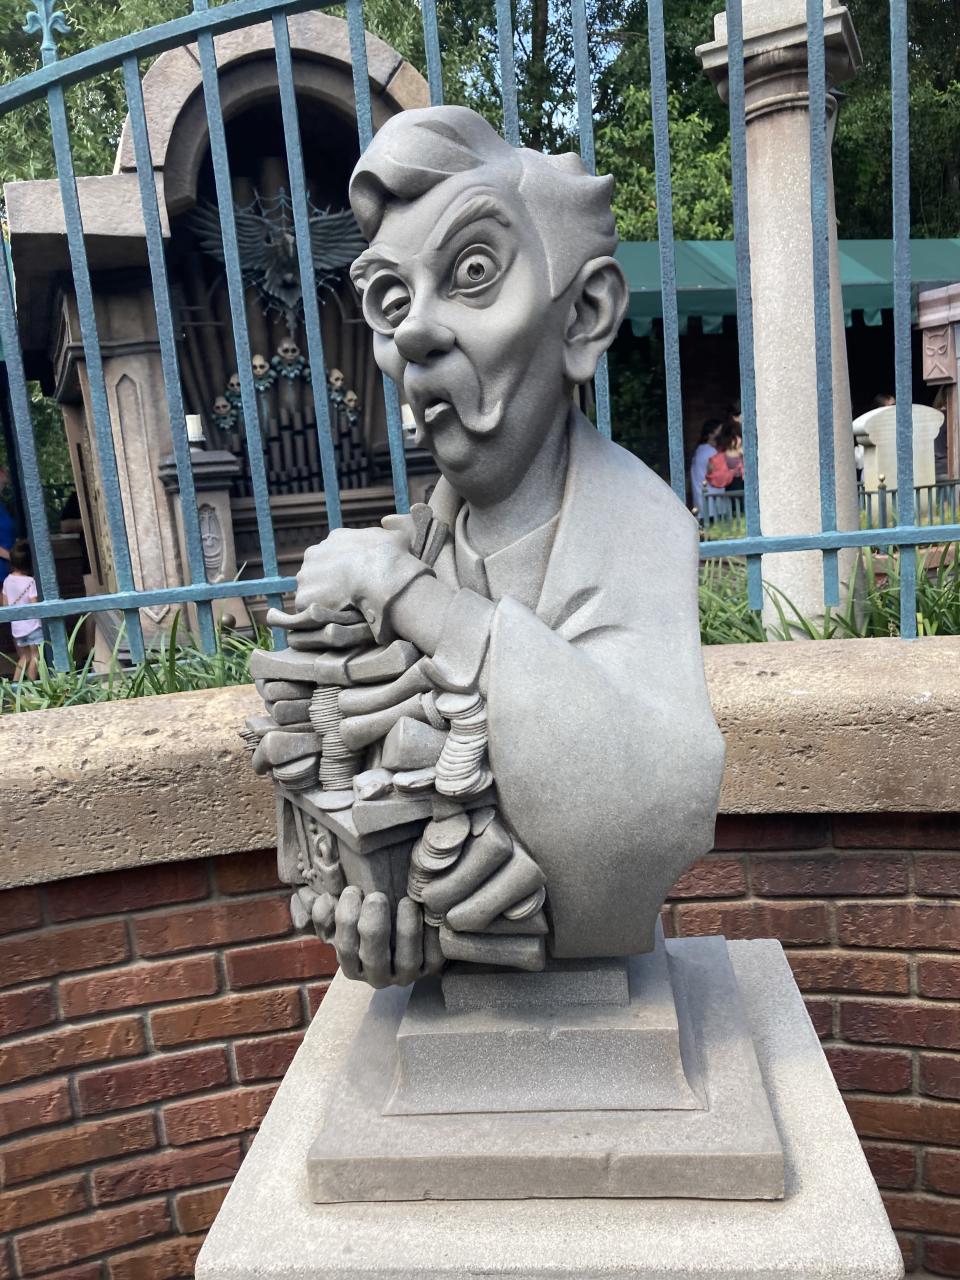 A bust at the front of the queue for Haunted Mansion